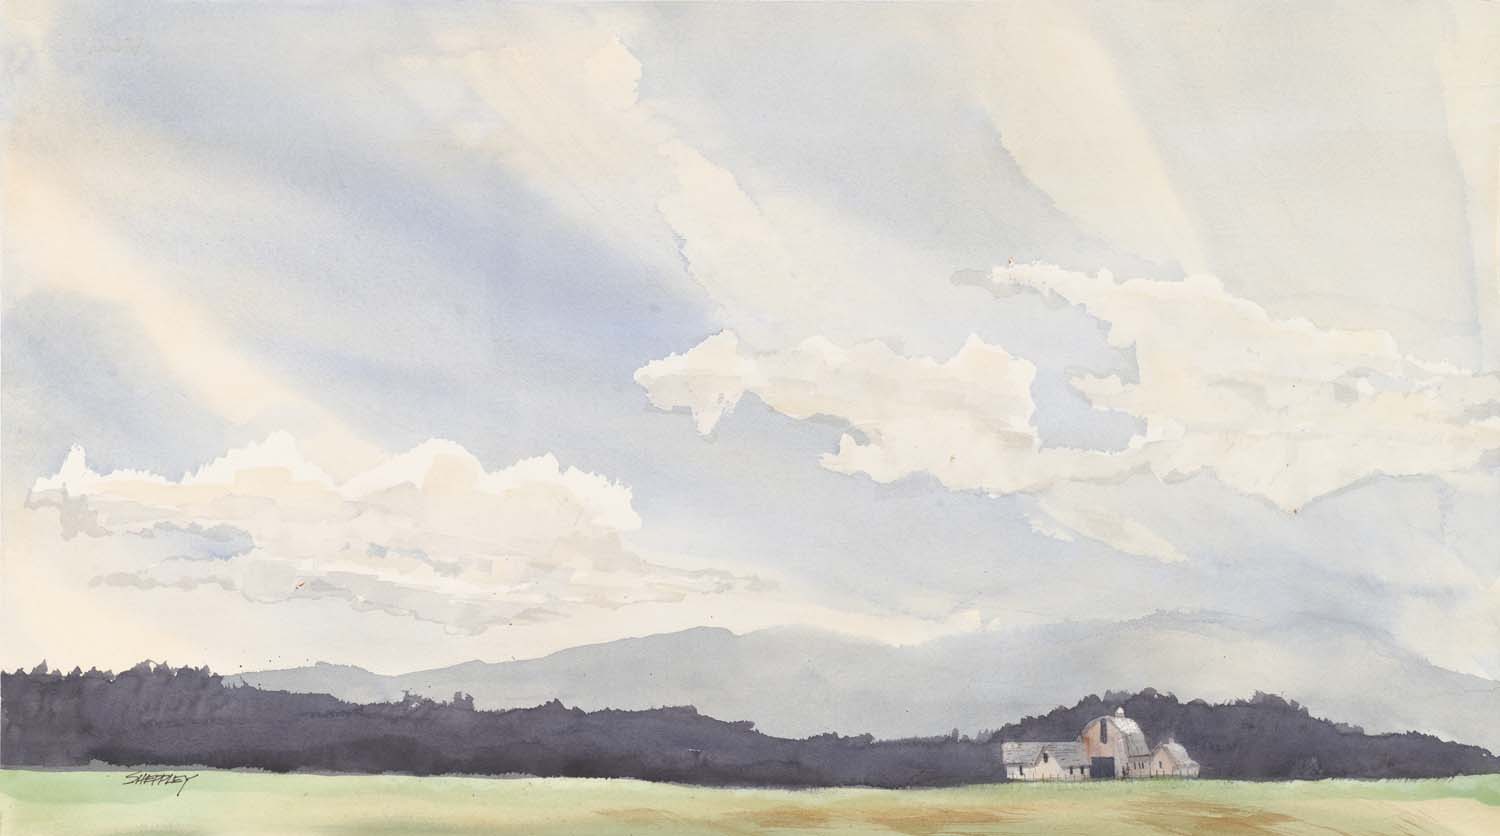 A watercolor painting of a farm under a large sky